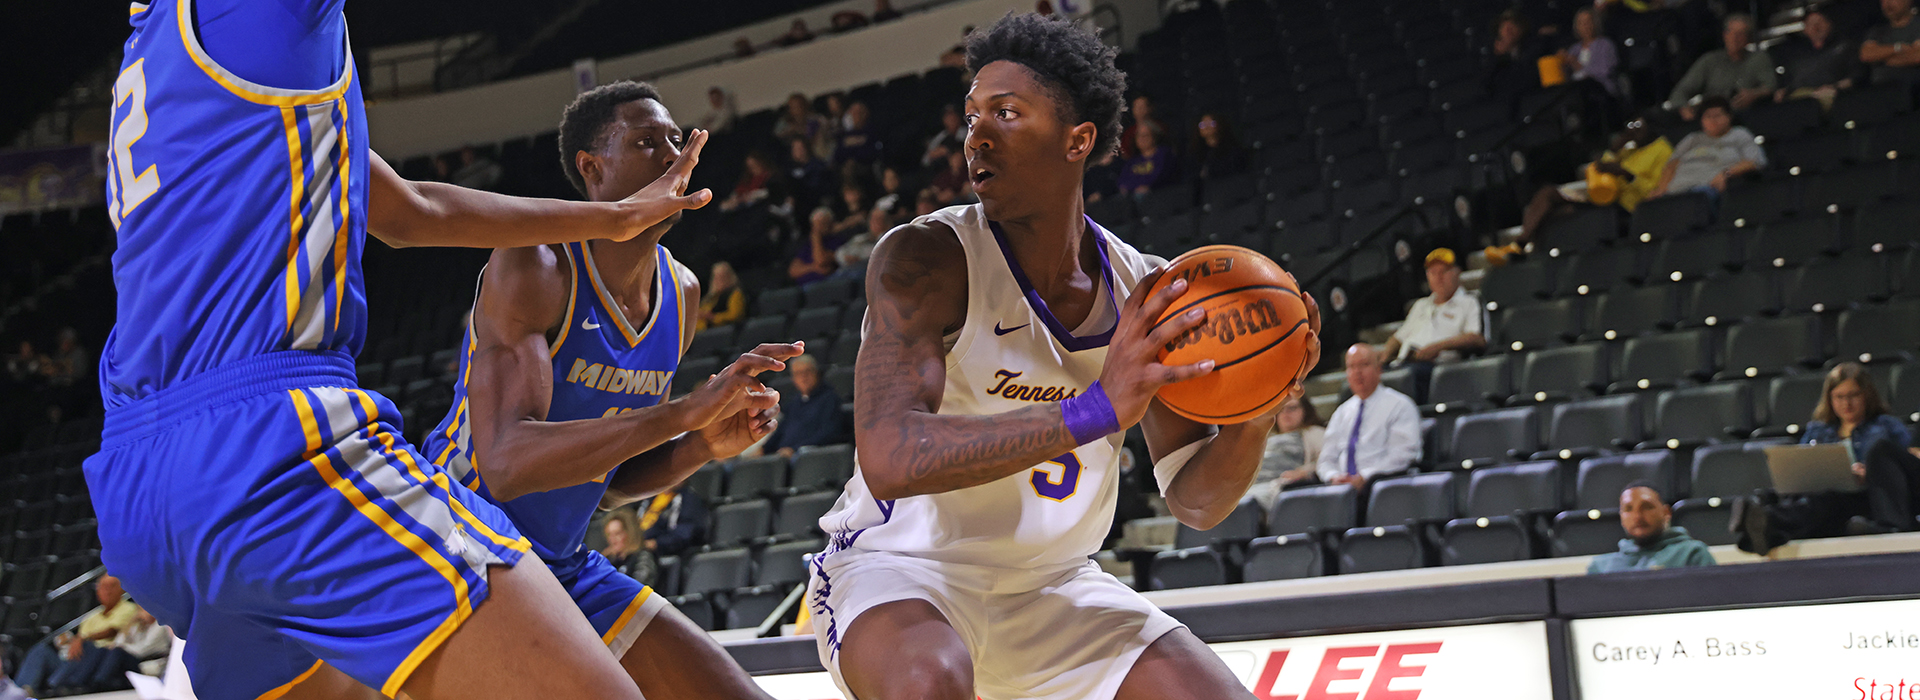 Group effort leads Tech men's hoops to double-digit win over Midway